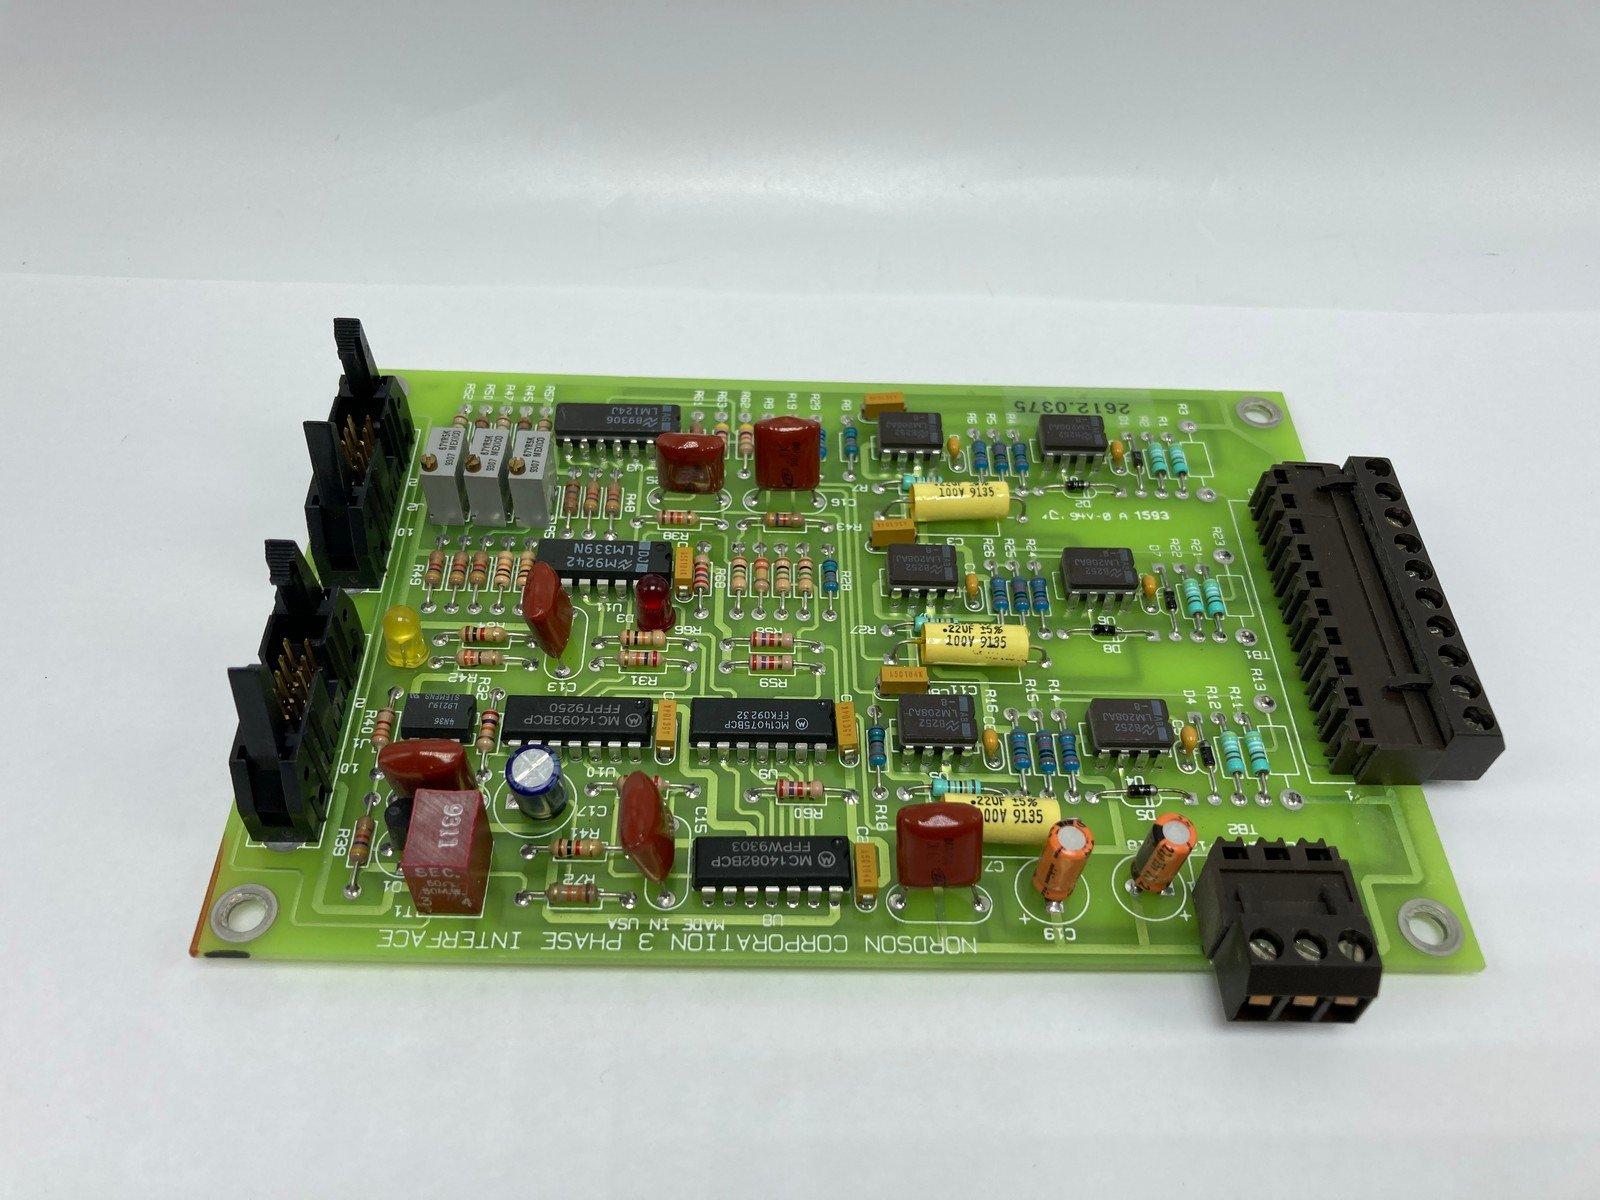   126716 HOT MELT PLC CIRCUIT BOARD 3 PHASE INTERFACE TESTED 